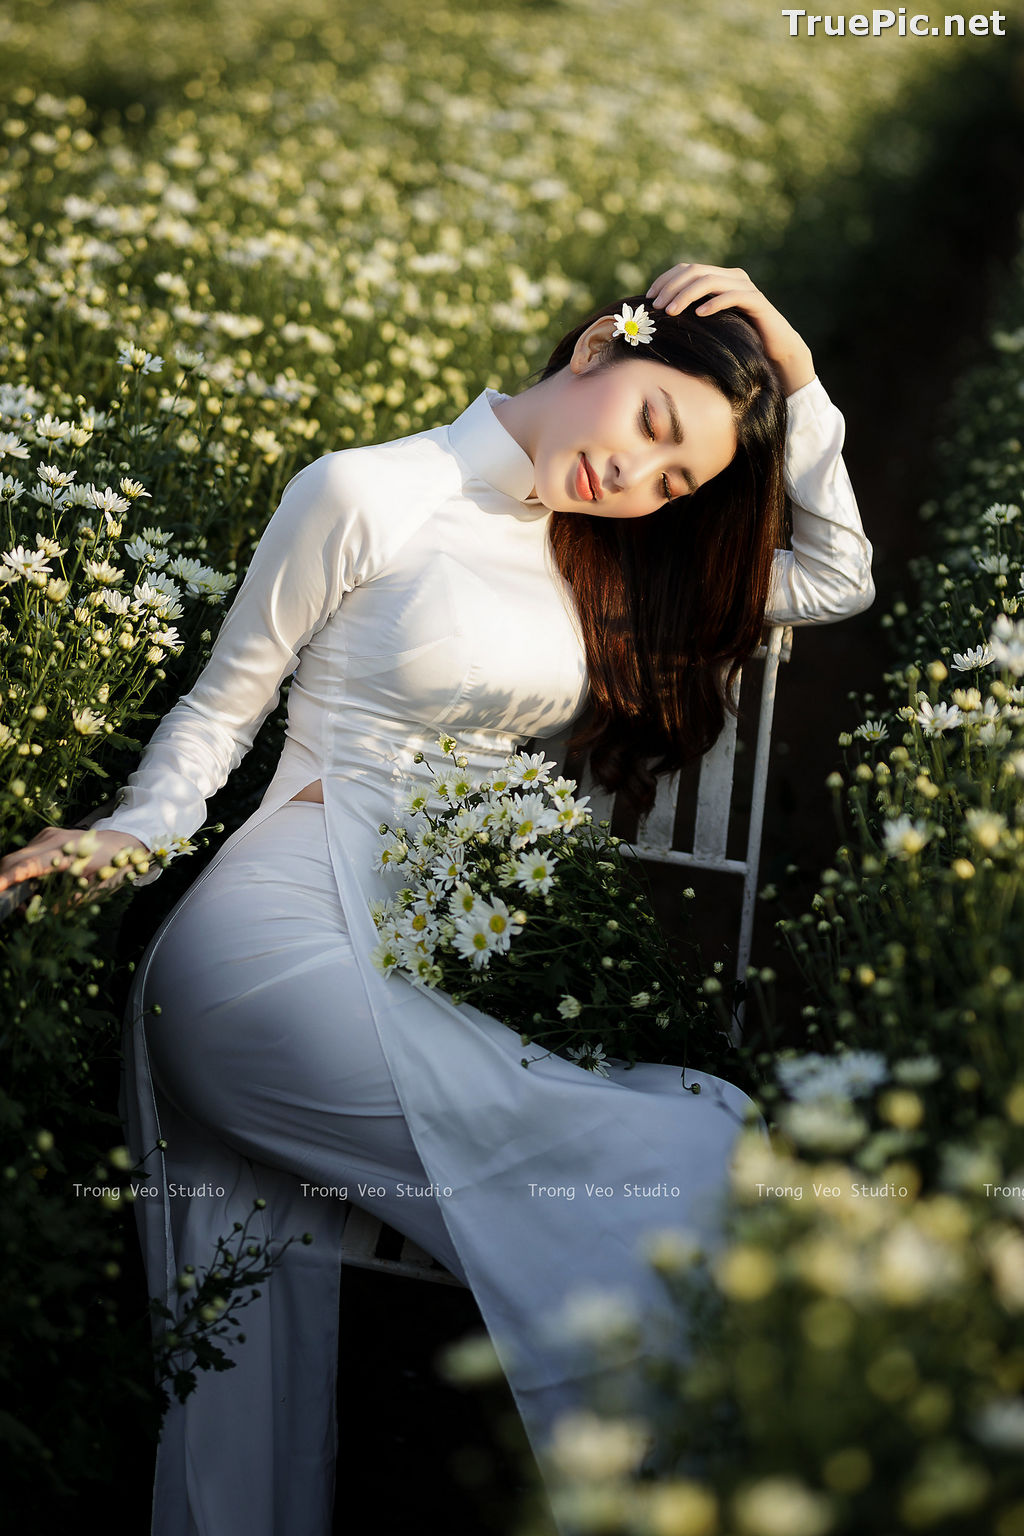 Image The Beauty of Vietnamese Girls with Traditional Dress (Ao Dai) #1 - TruePic.net - Picture-36